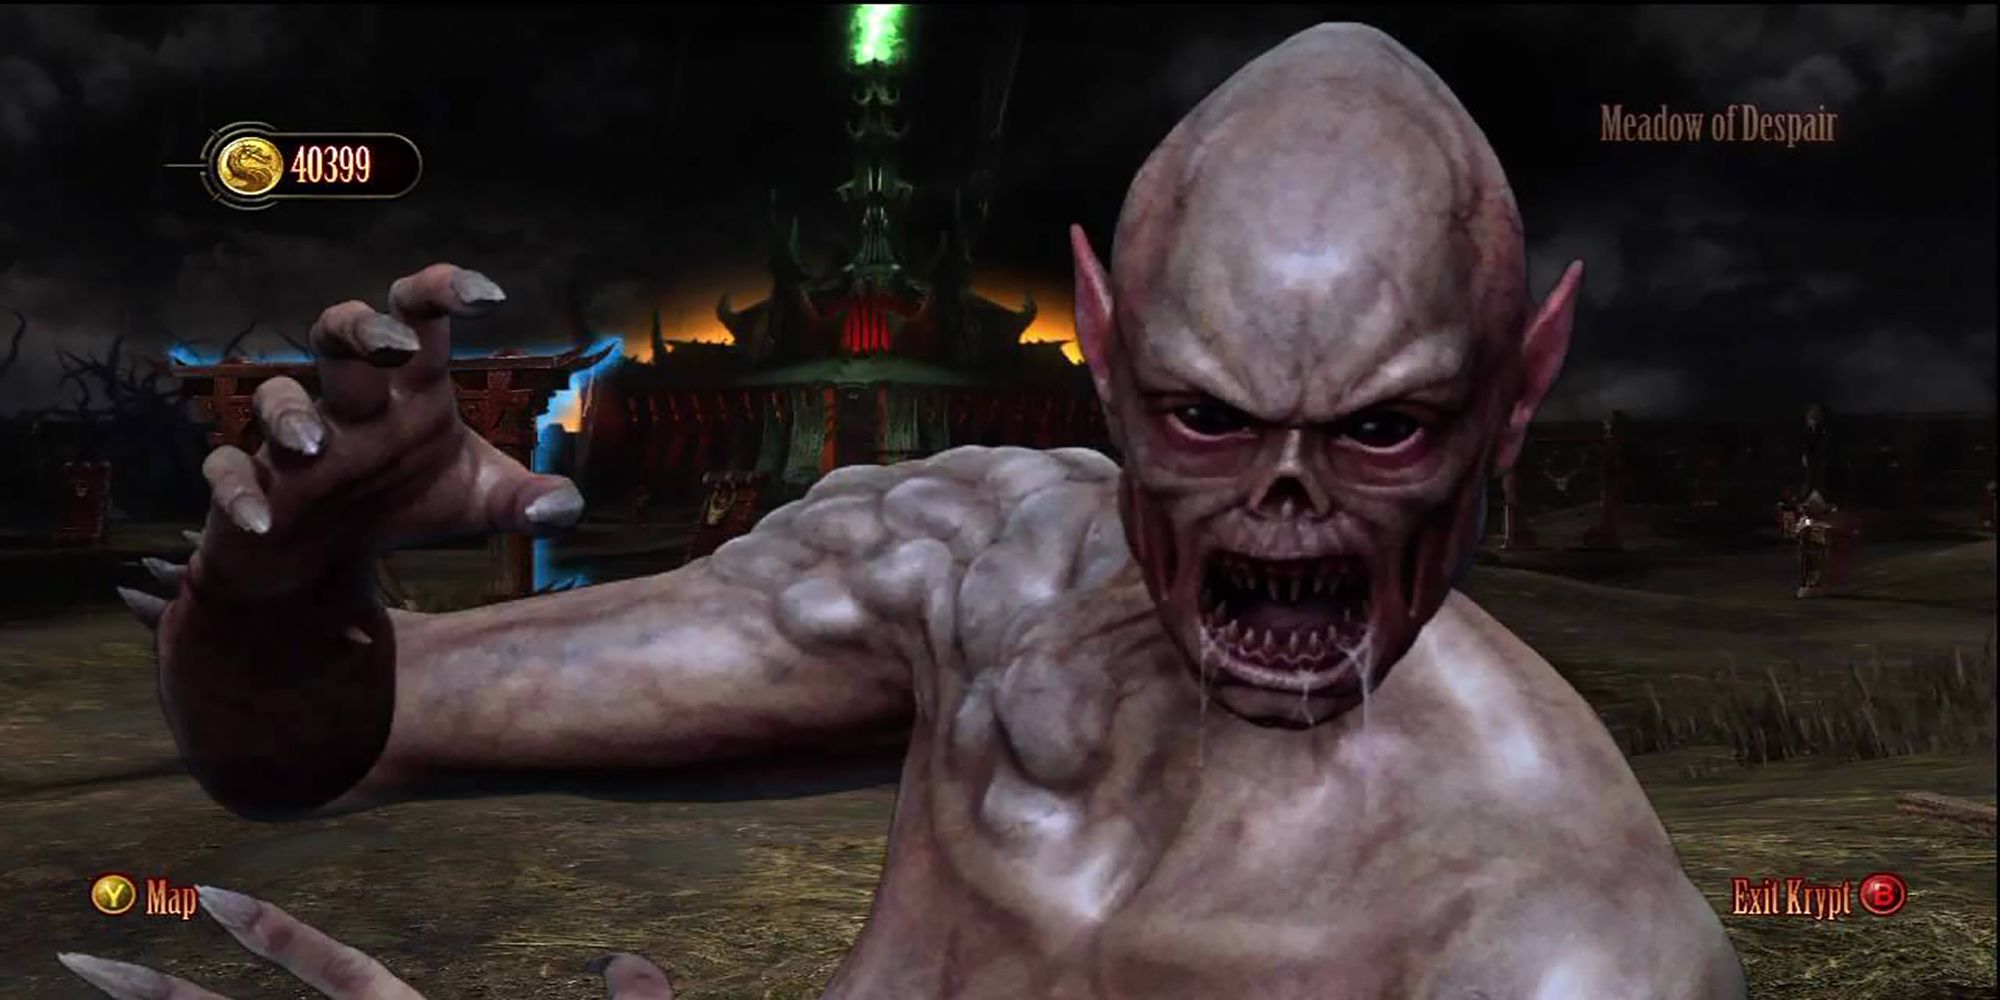 The Krypt monster, foaming at the mouth, leaps at the player in Meadow Of Despair from Mortal Kombat 9.